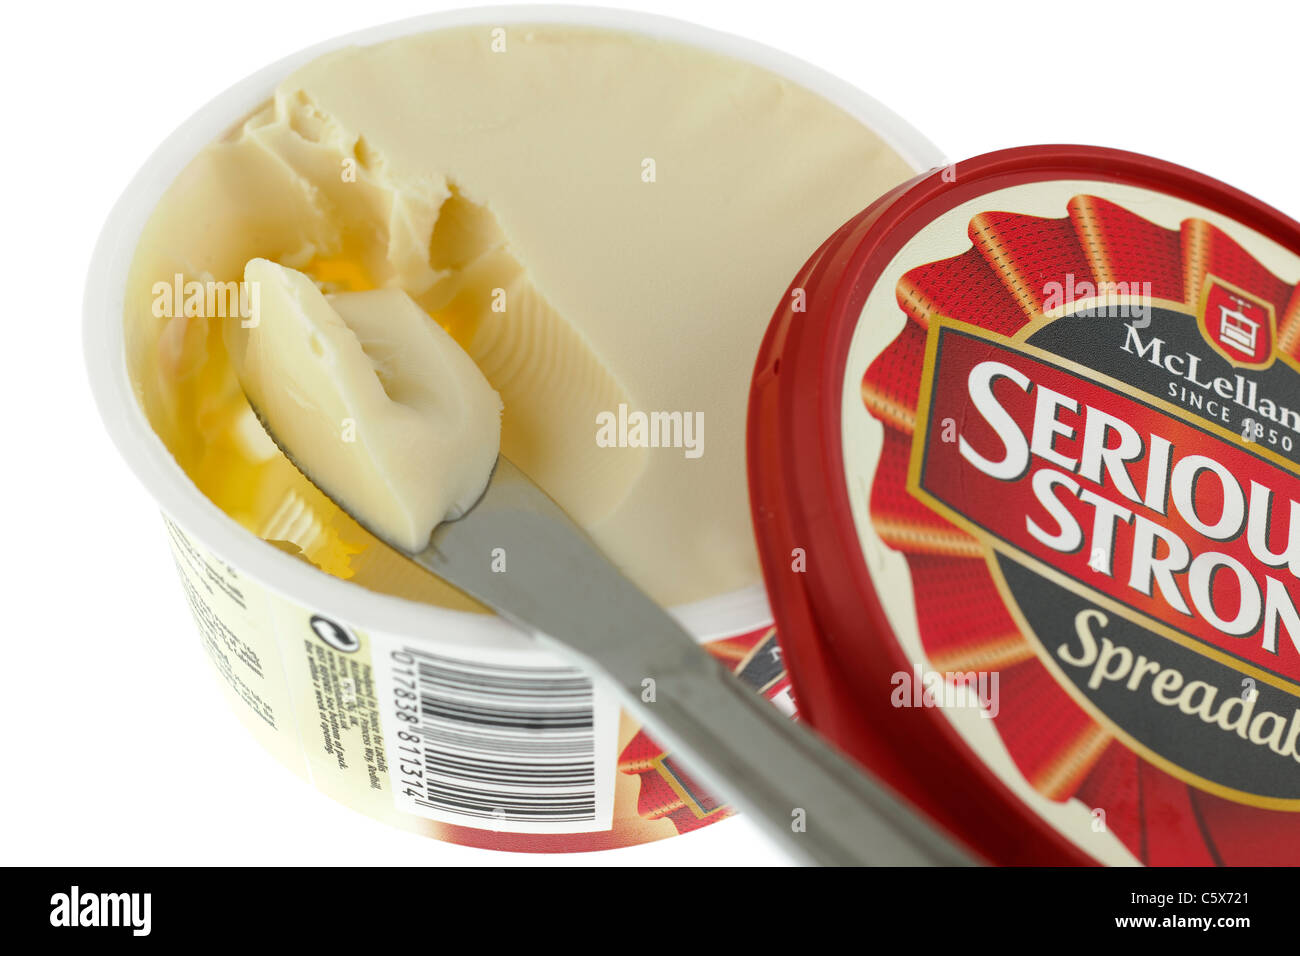 Tub of Spreadable Seriously Strong McLelland cheese spread and a portion on a knife. Stock Photo